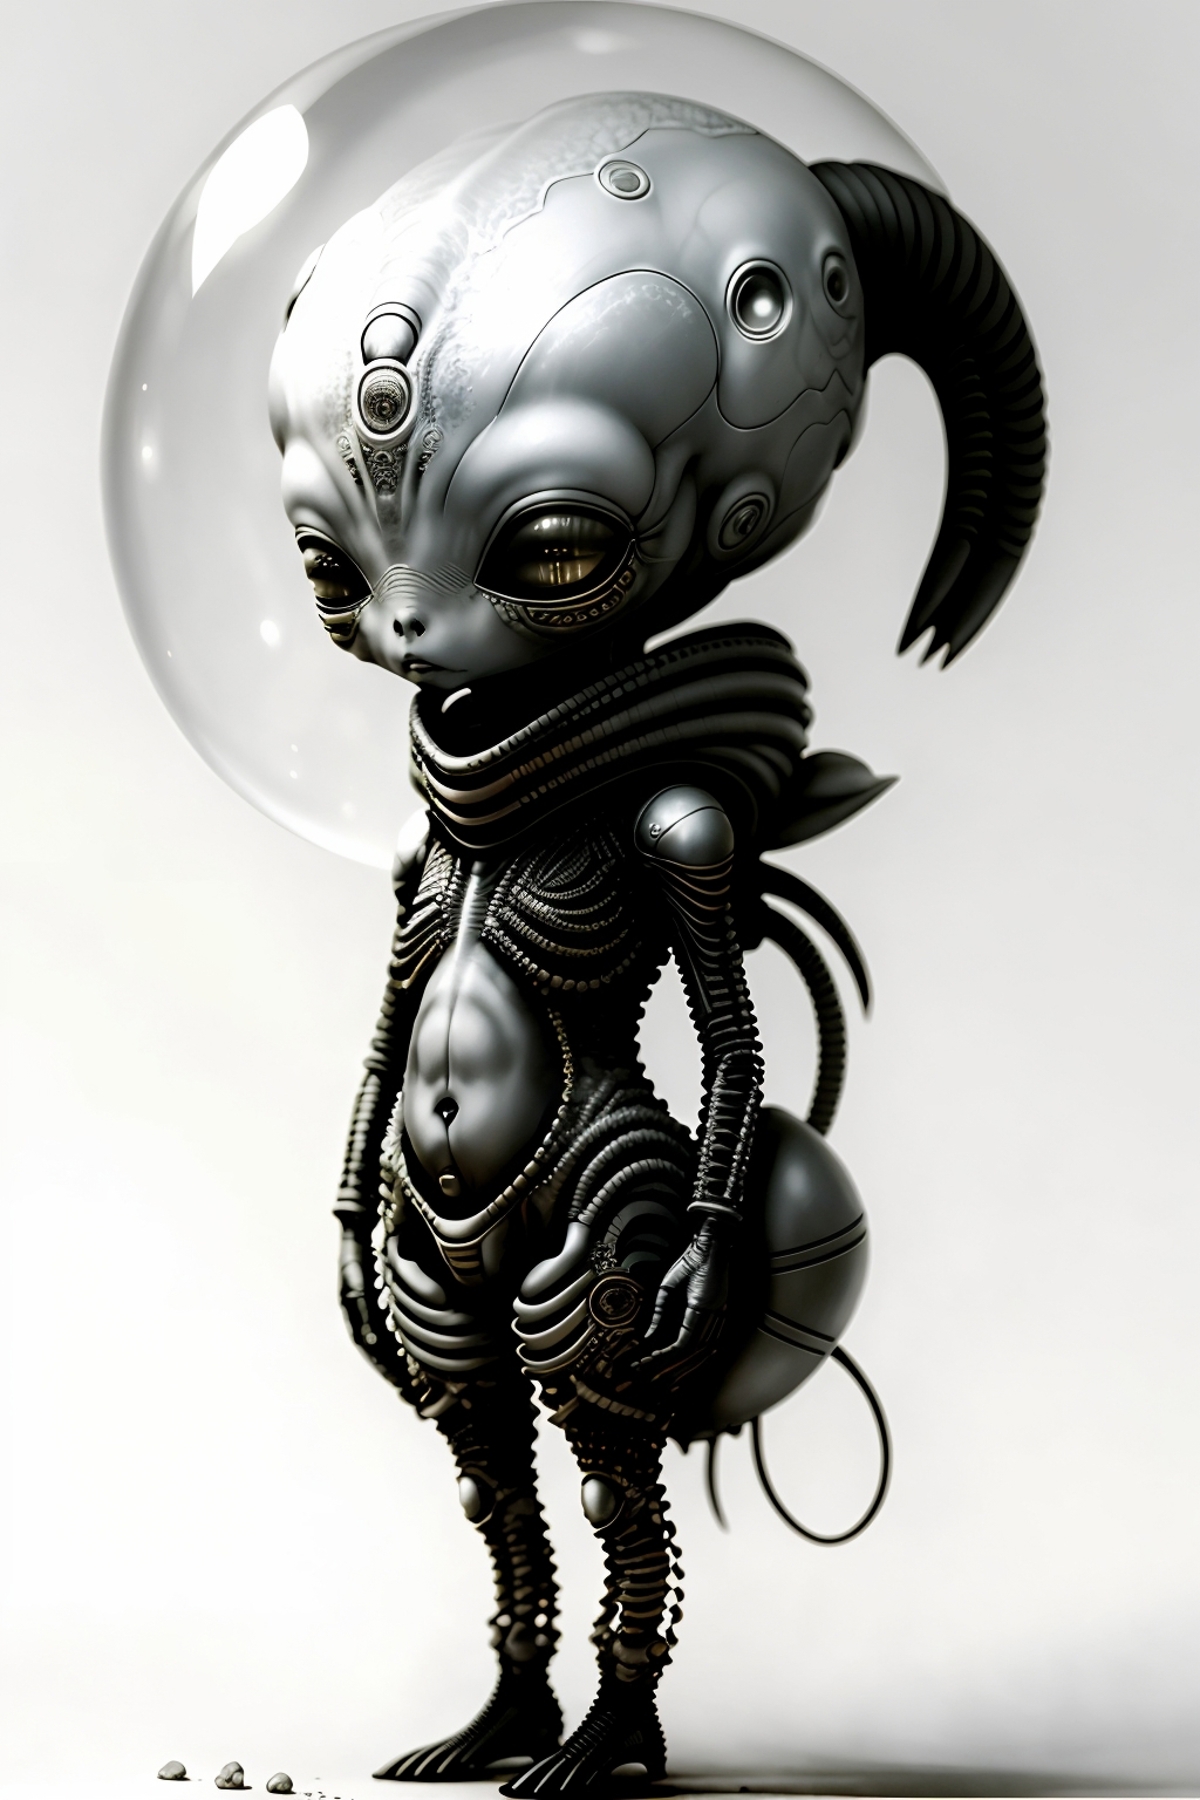 Creature Vase - creature00d image by muf00d